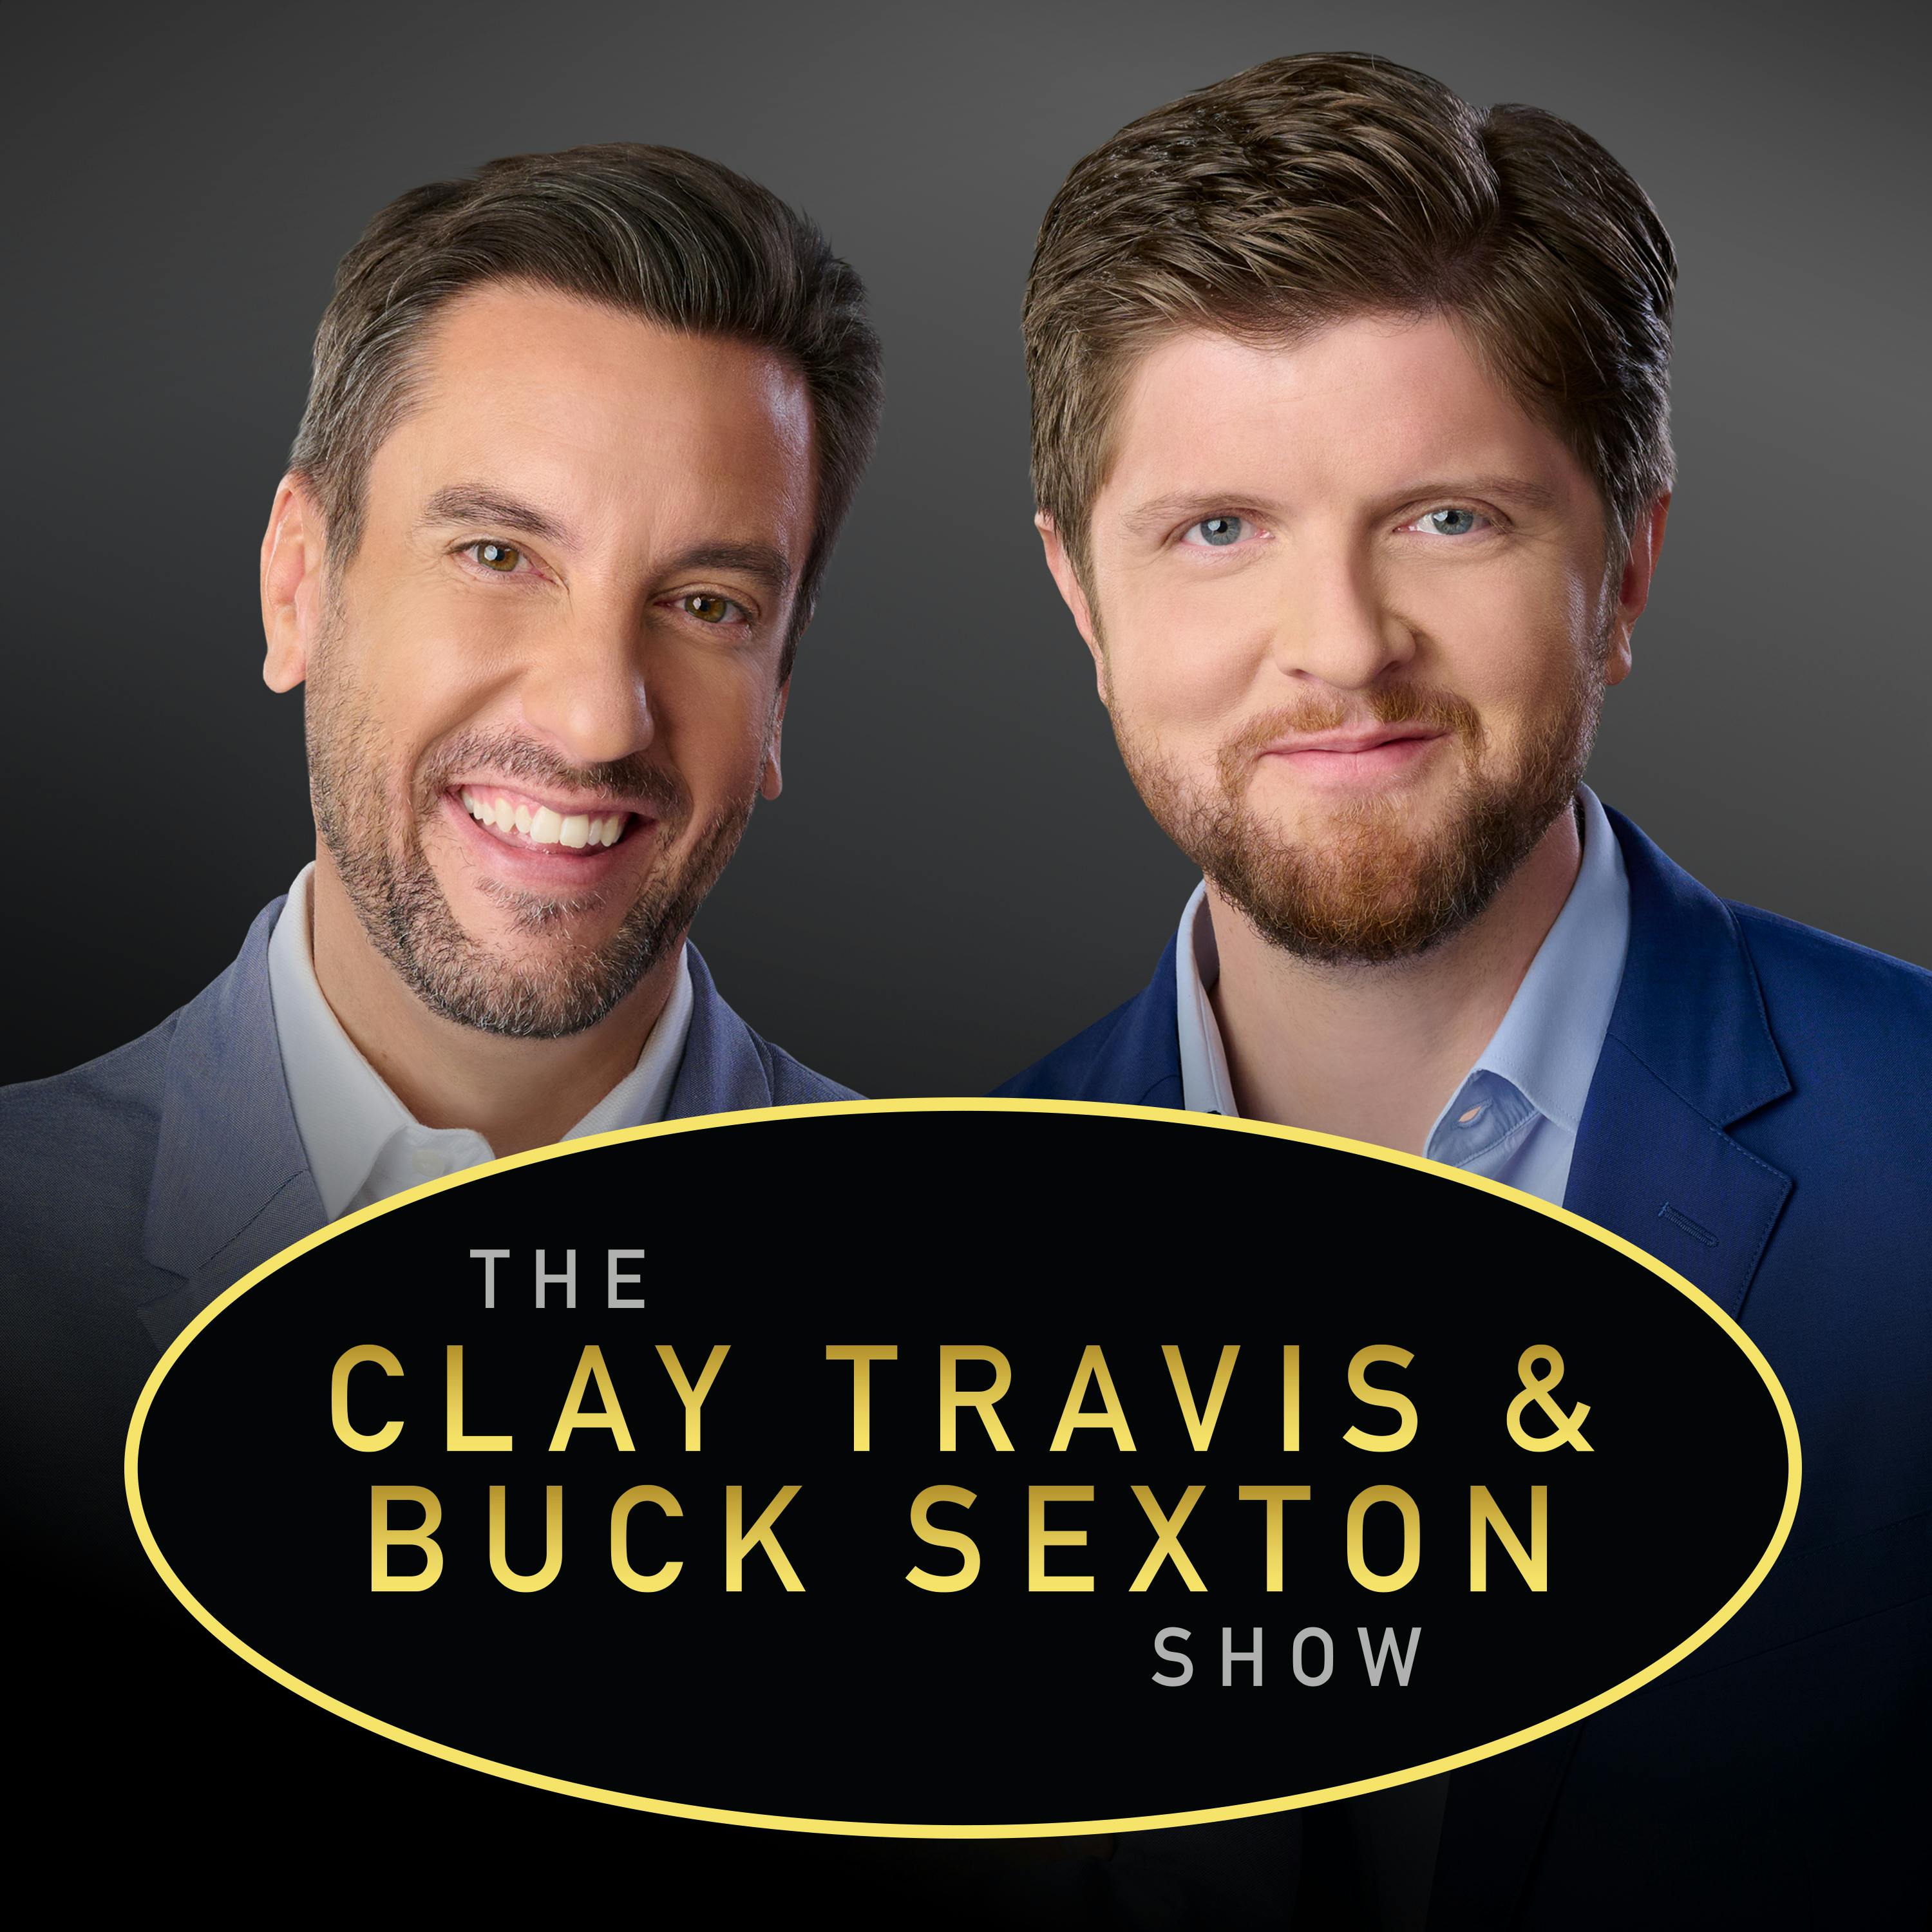 Clay Travis and Buck Sexton Show H1 – Dec 2 2021